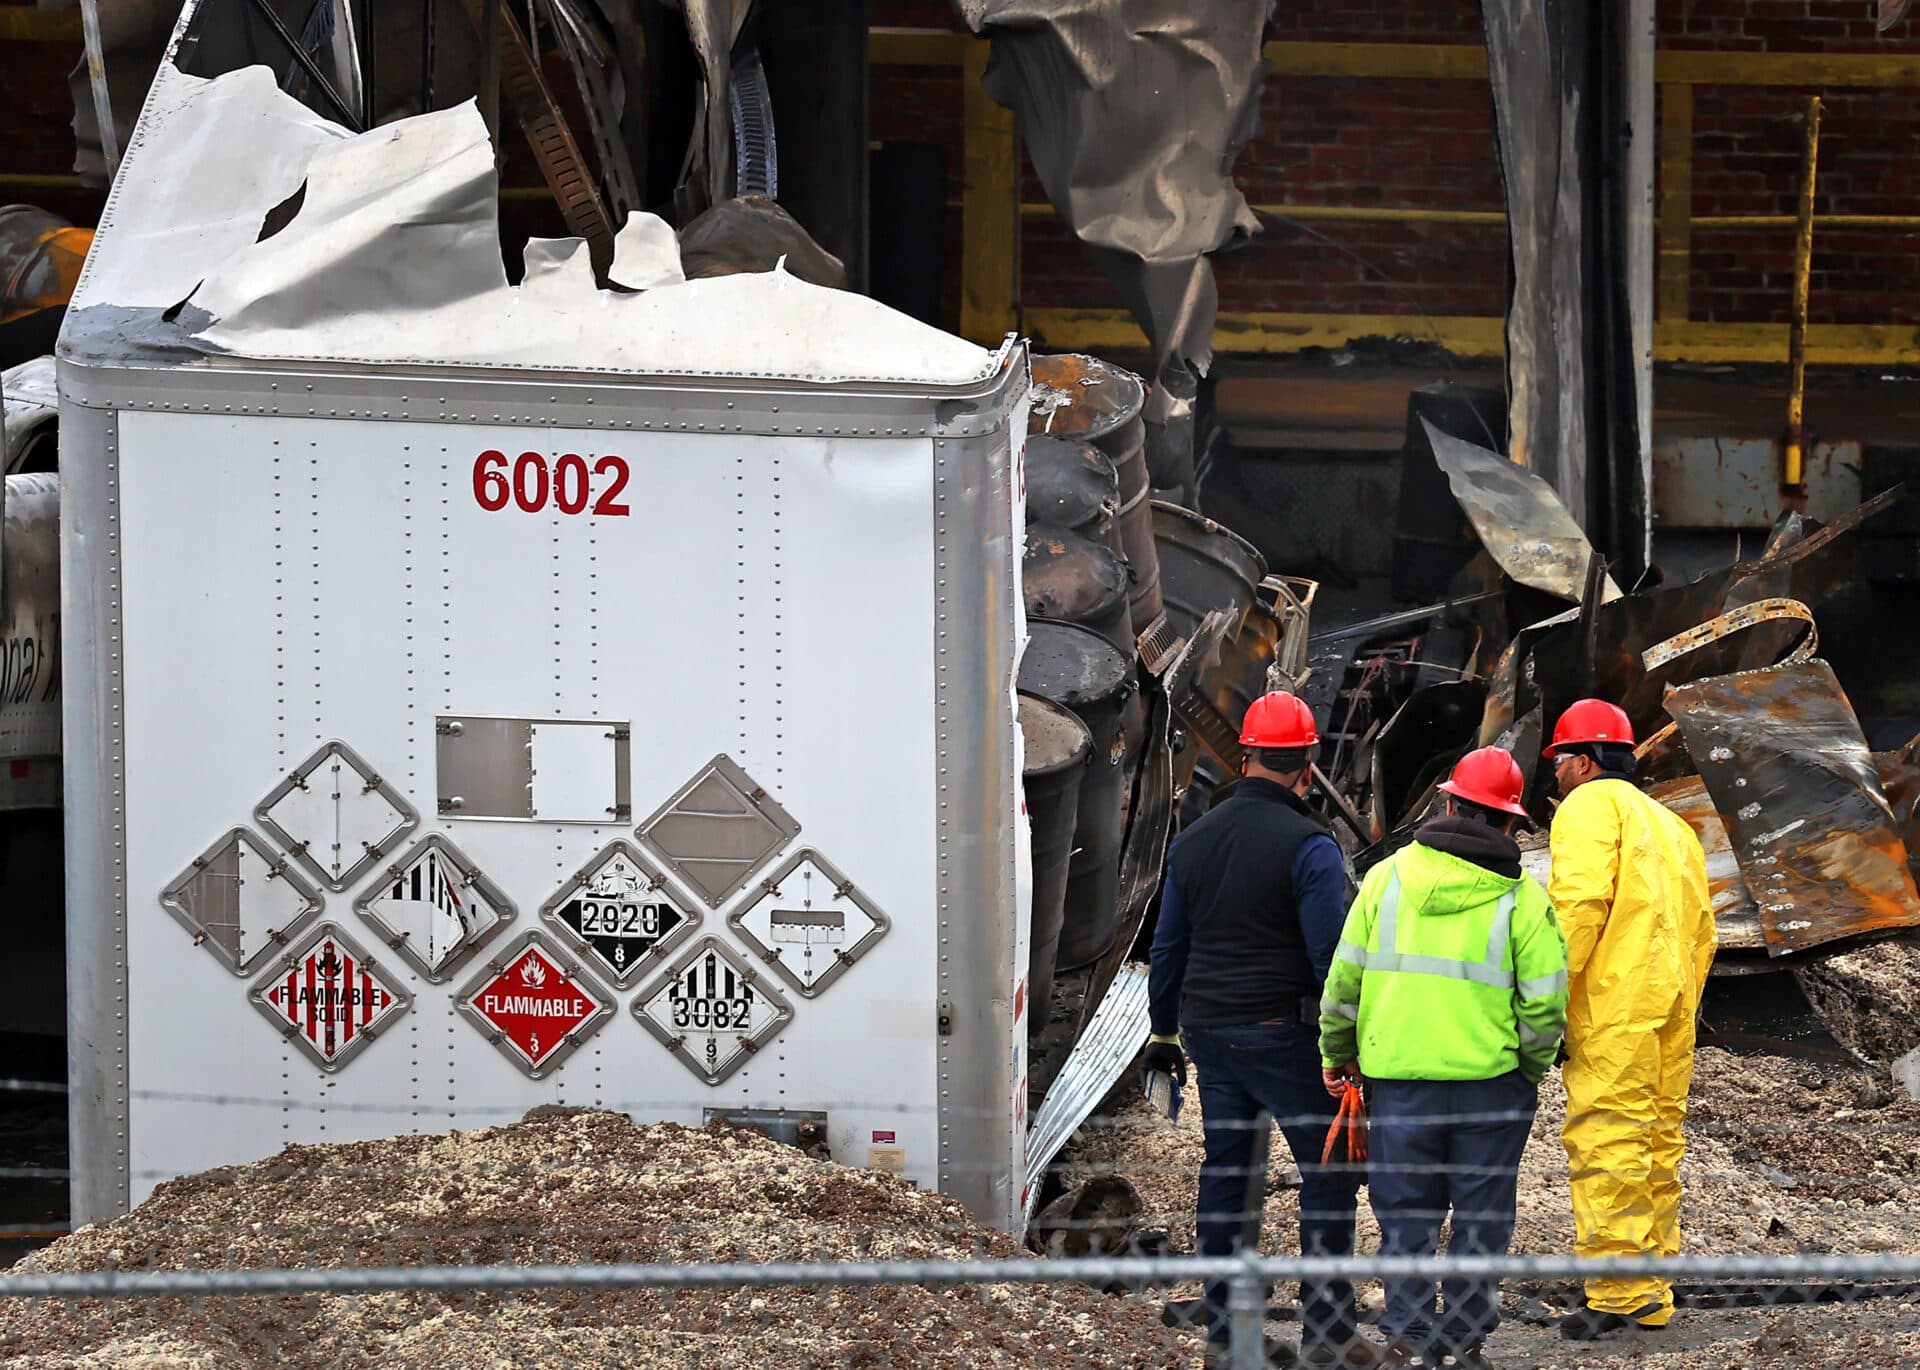 A work crew looks over a trailer marked with warning signs and barrels inside after a fire at Clean Harbors in Braintree. (David L. Ryan/The Boston Globe via Getty Images)